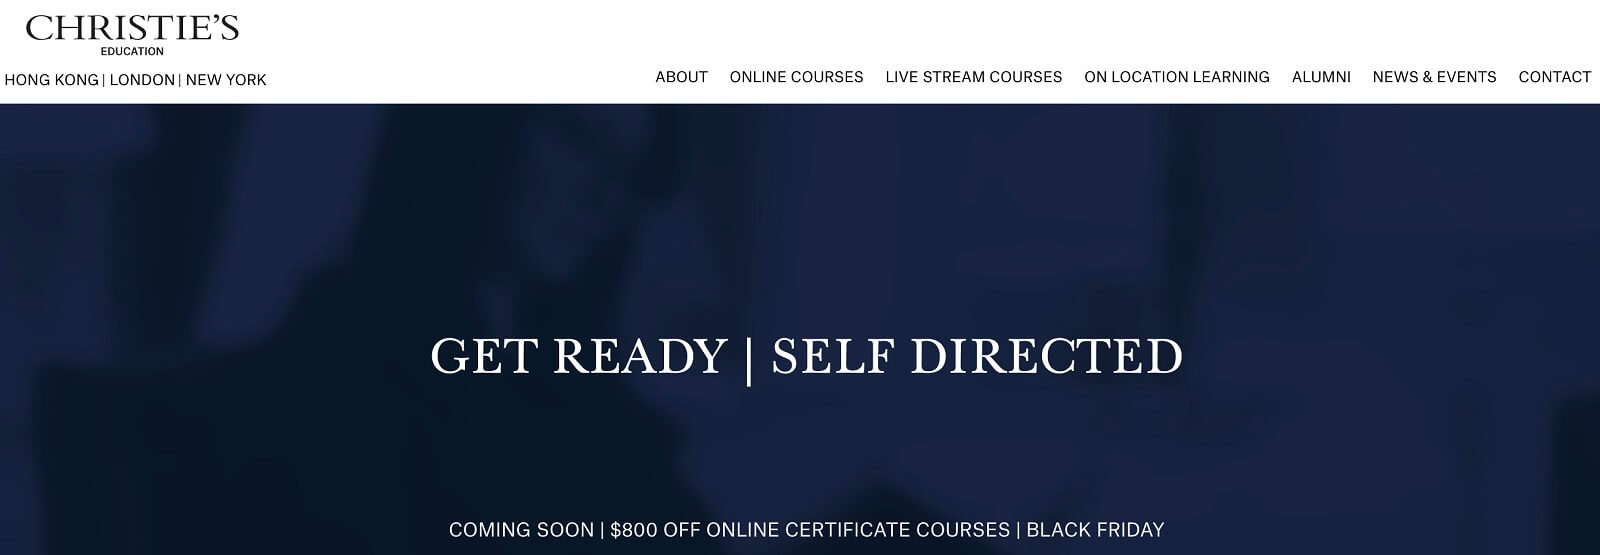 an image of Christie's Education website announcing an upcoming sale in dark blue background